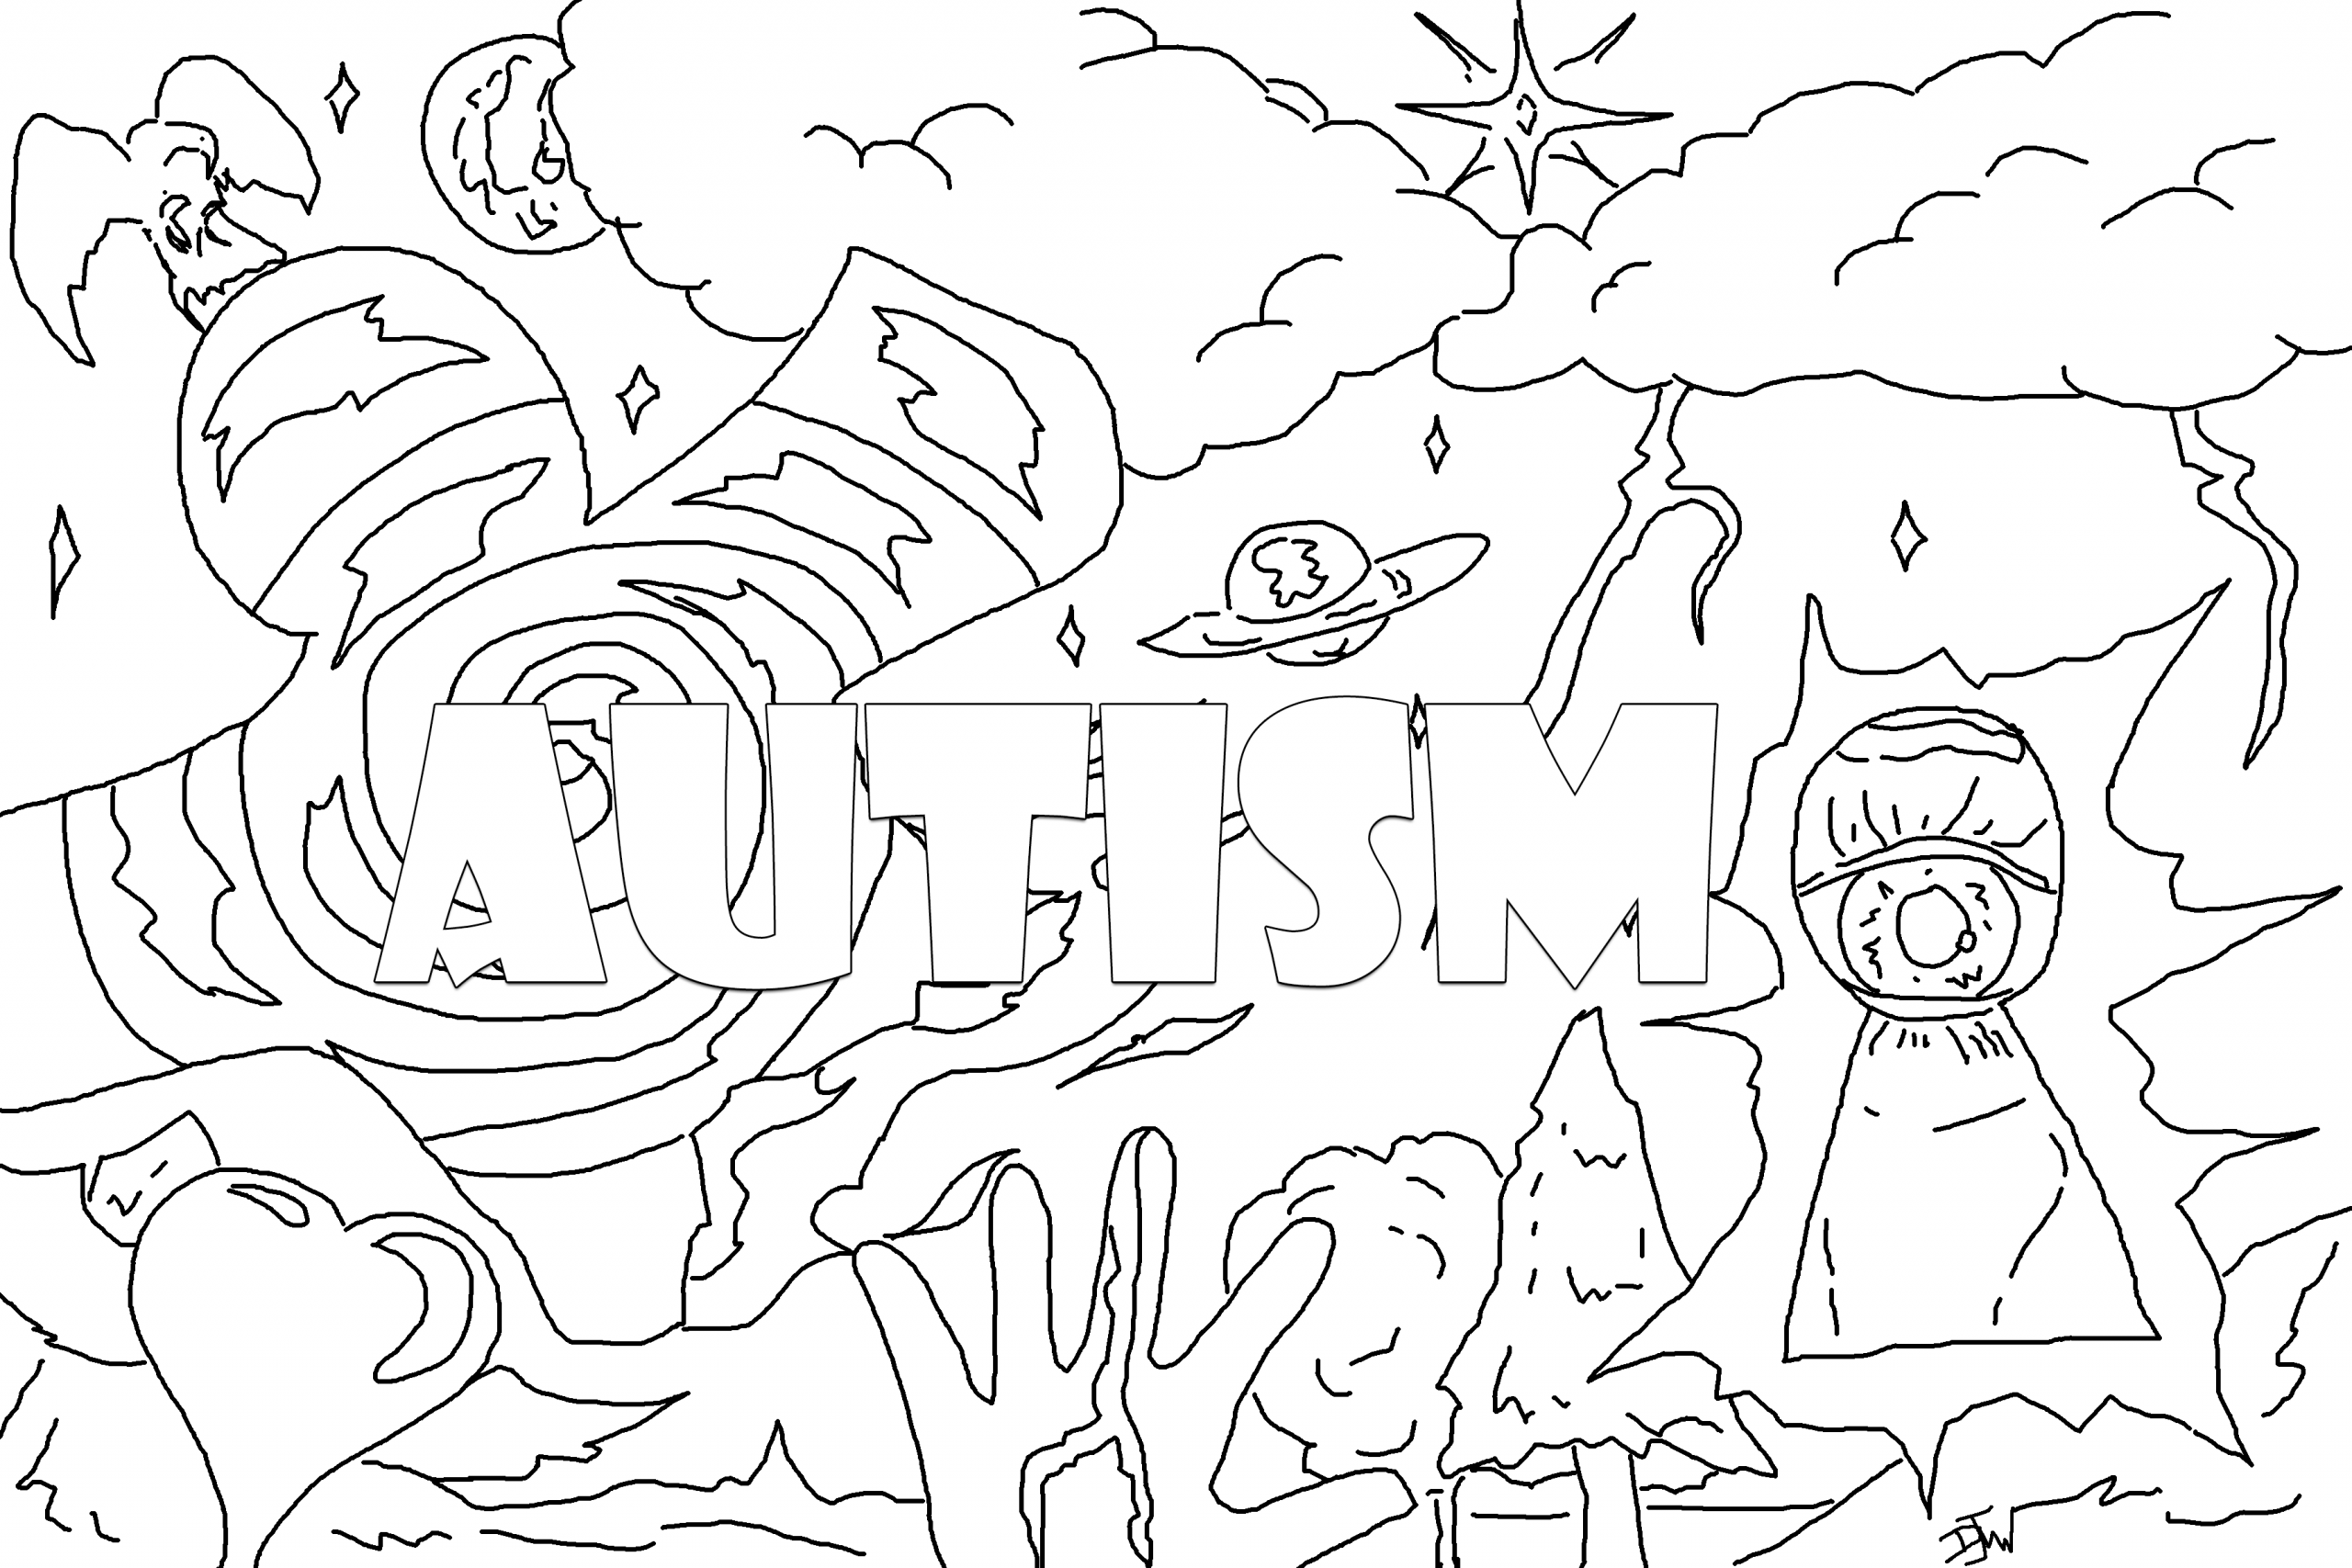 Coloring Book For Autistic Adults - 167+ Popular SVG Design